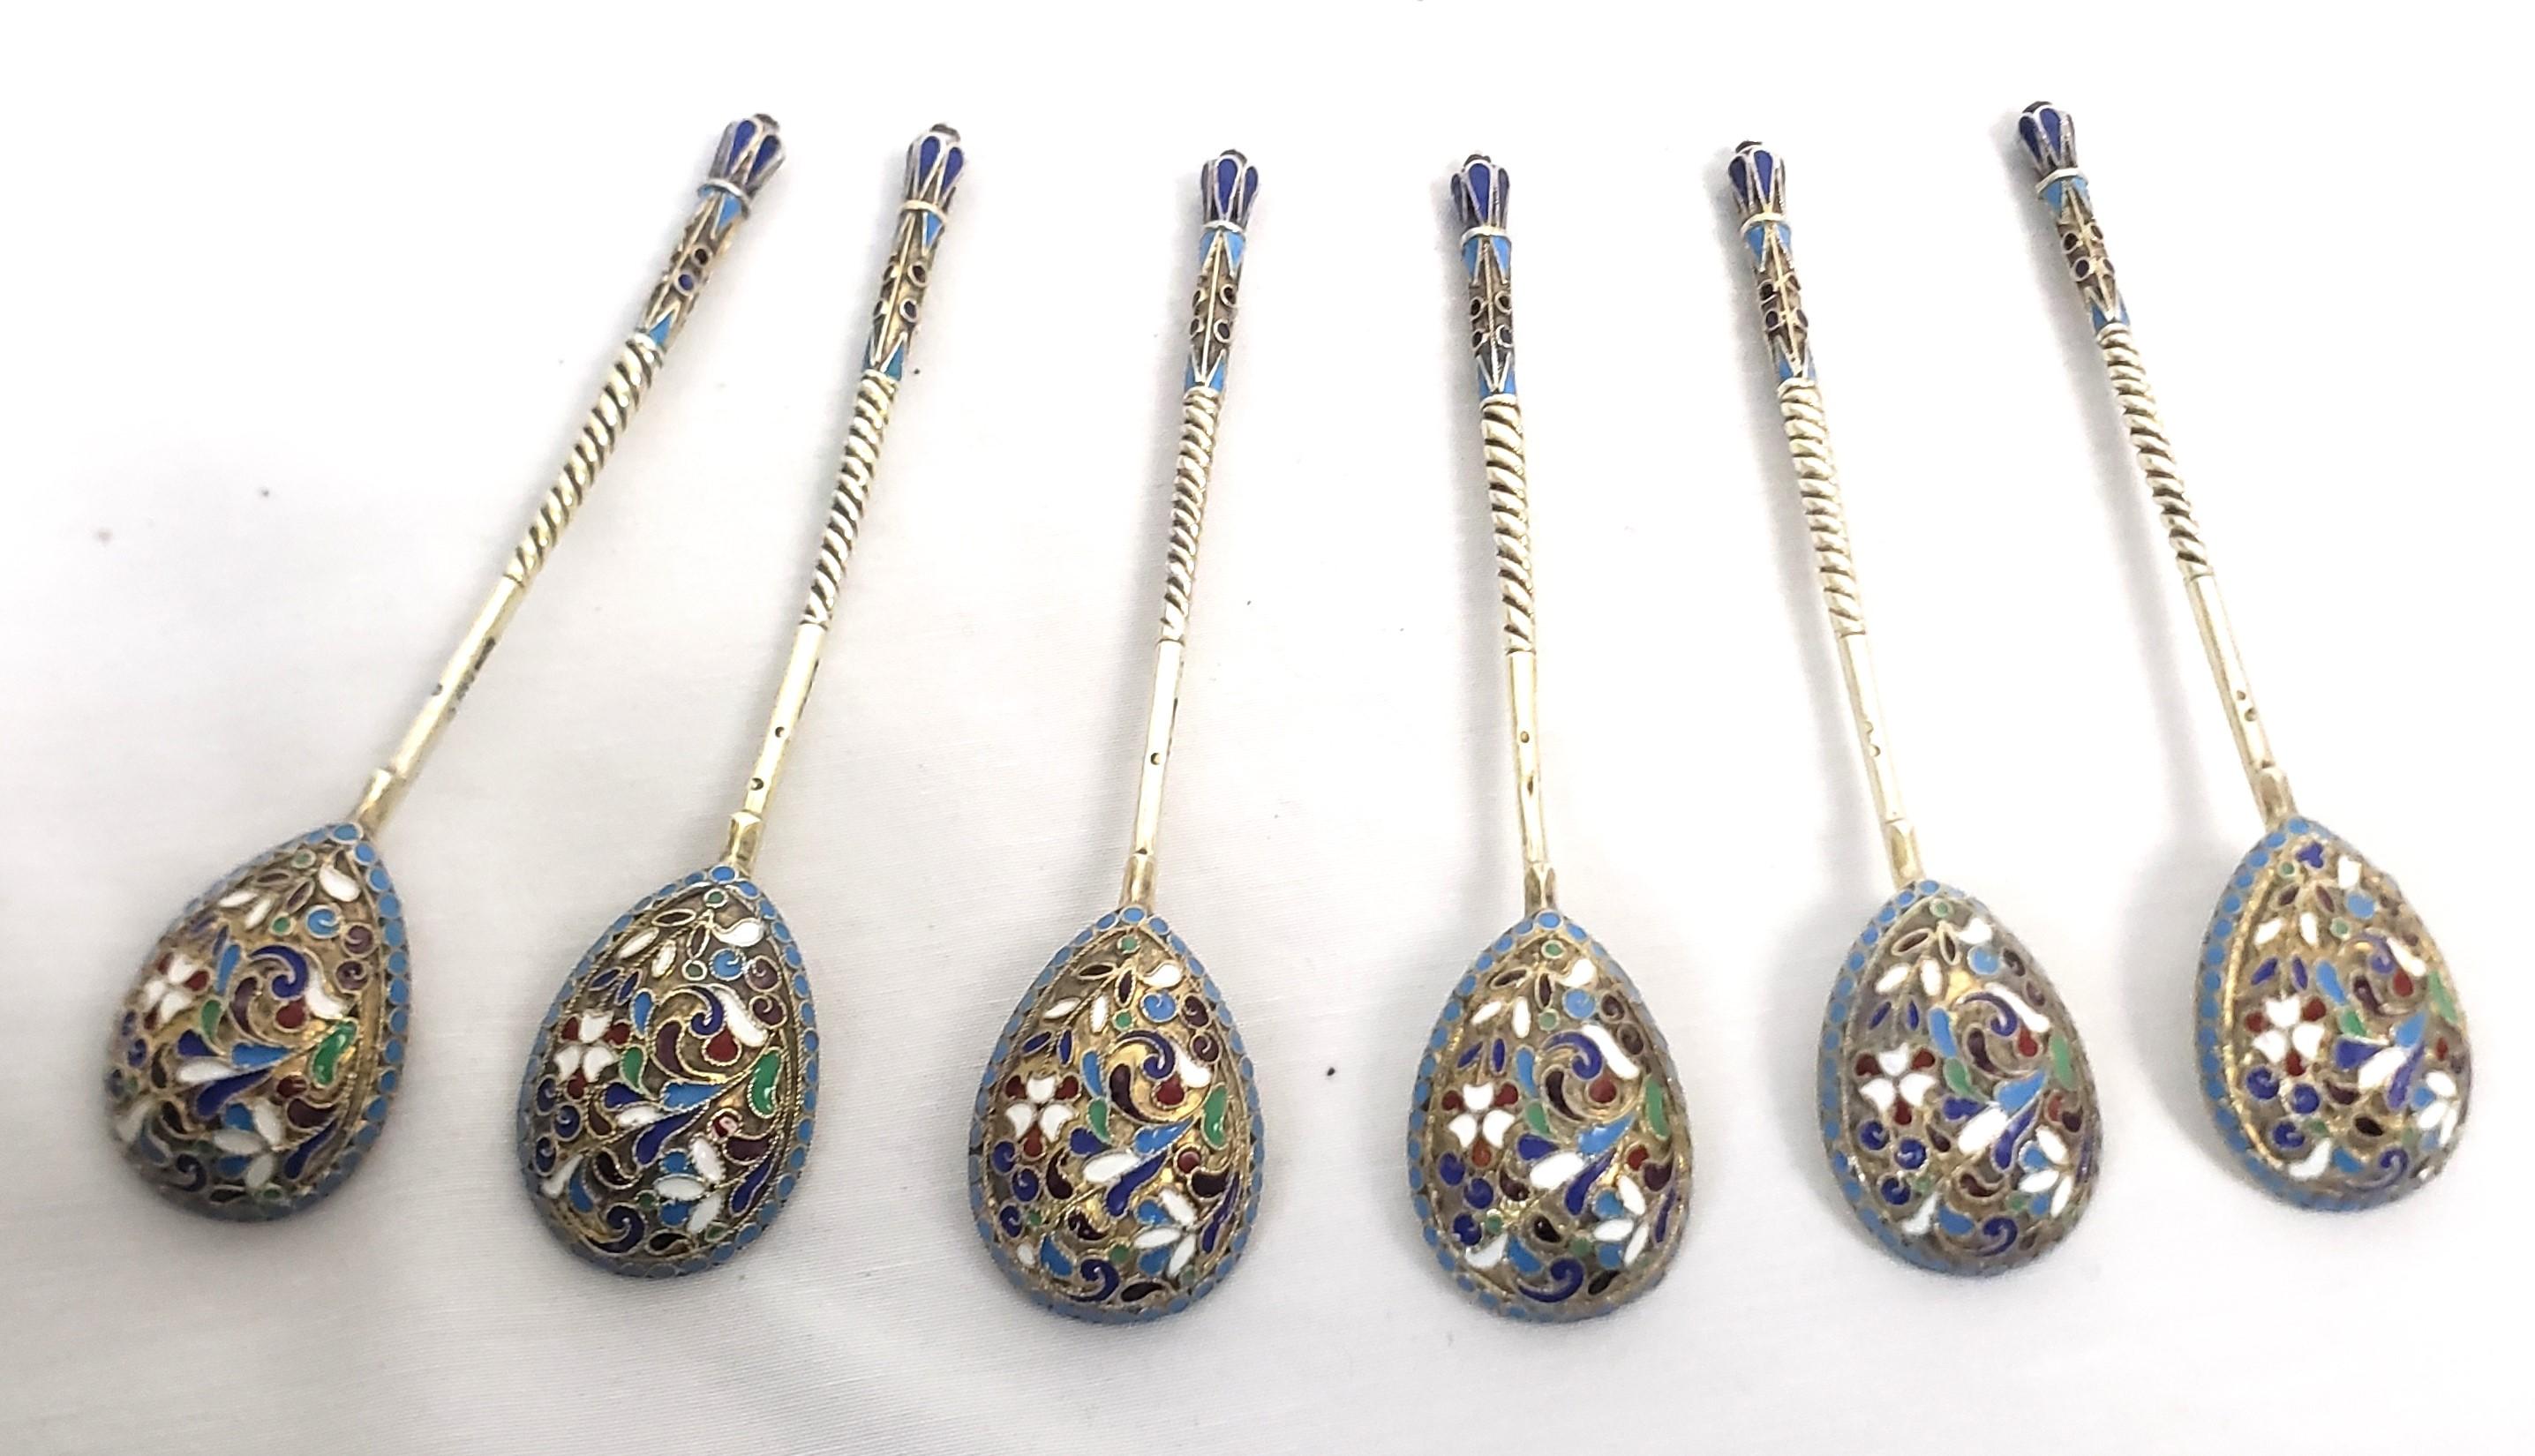 Antique Russian Silver & Enamel Spoon Set with Ornate Floral Motif For Sale 1